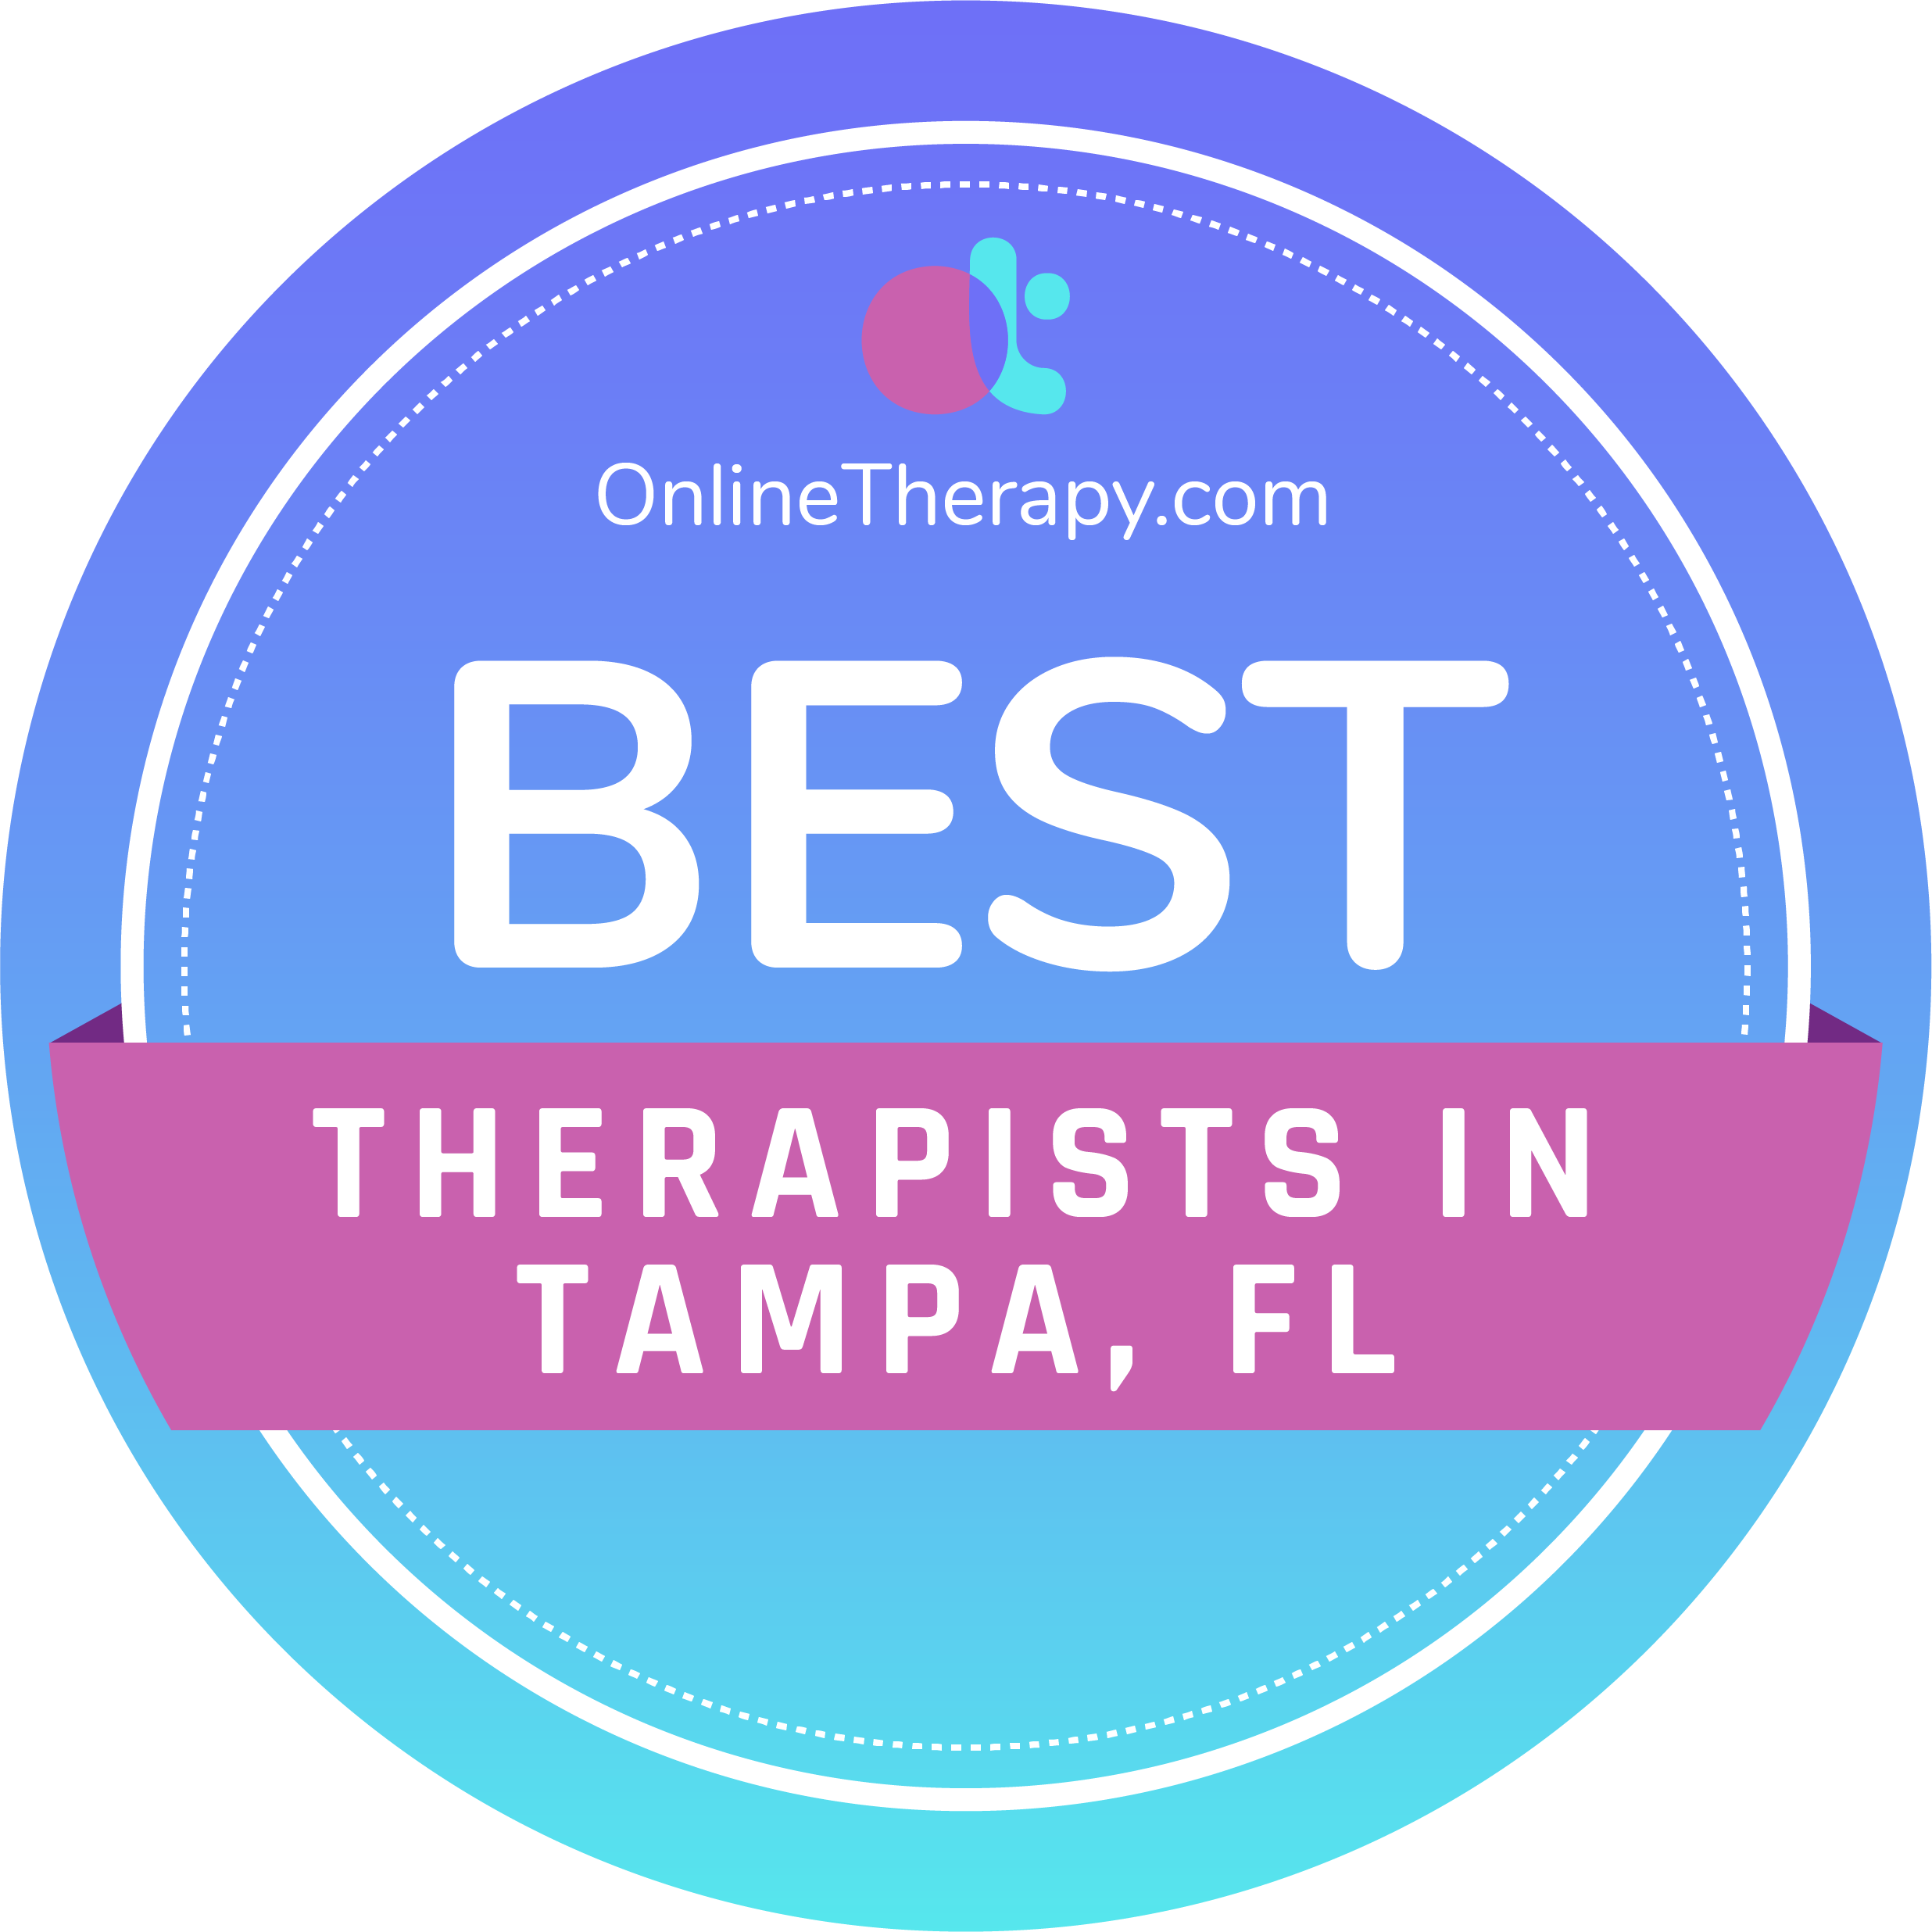 Therapists in TAMPA, FL Badge